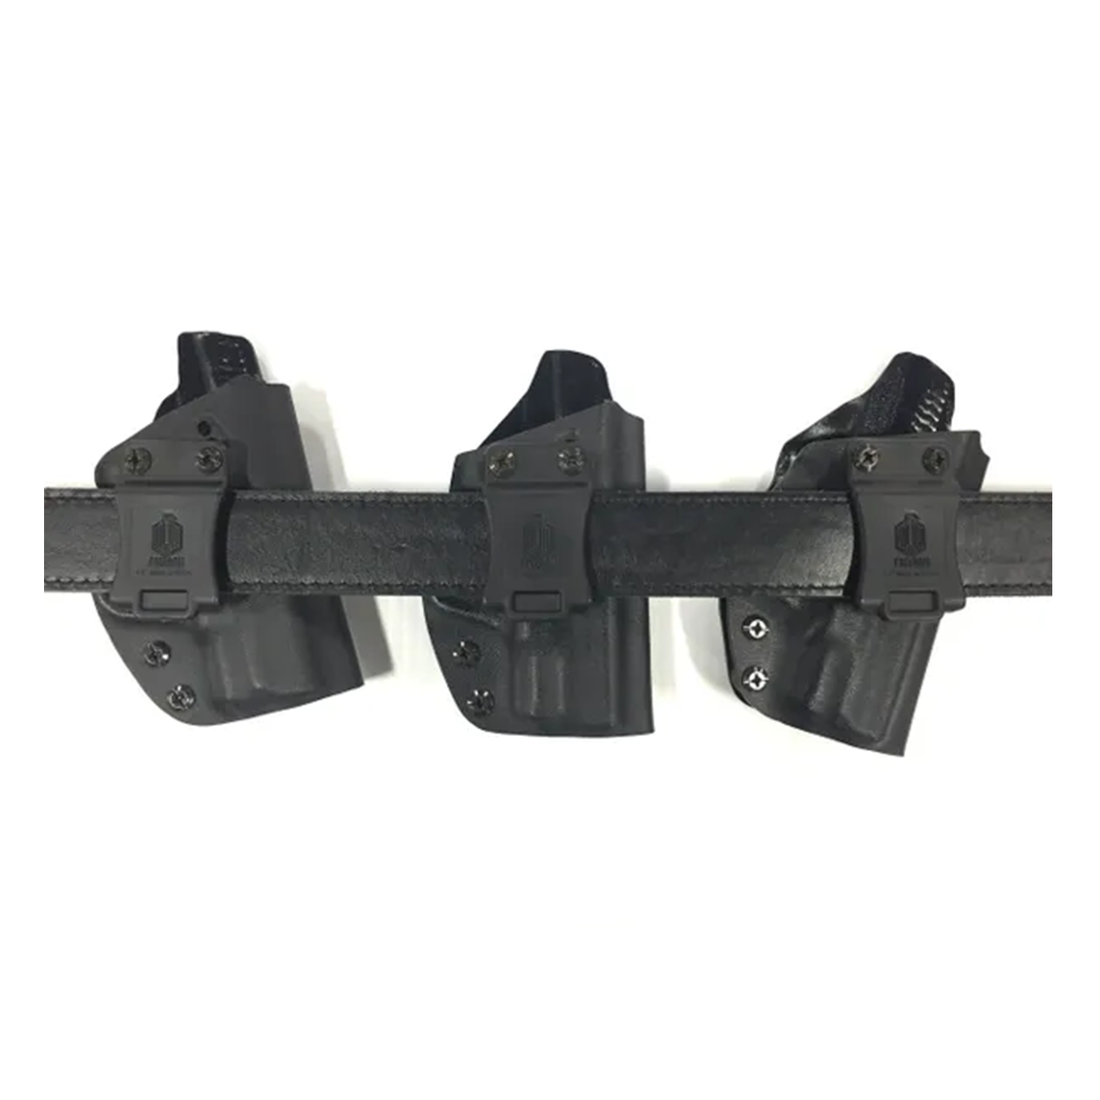 Palmetto State Armory IWB Holsters